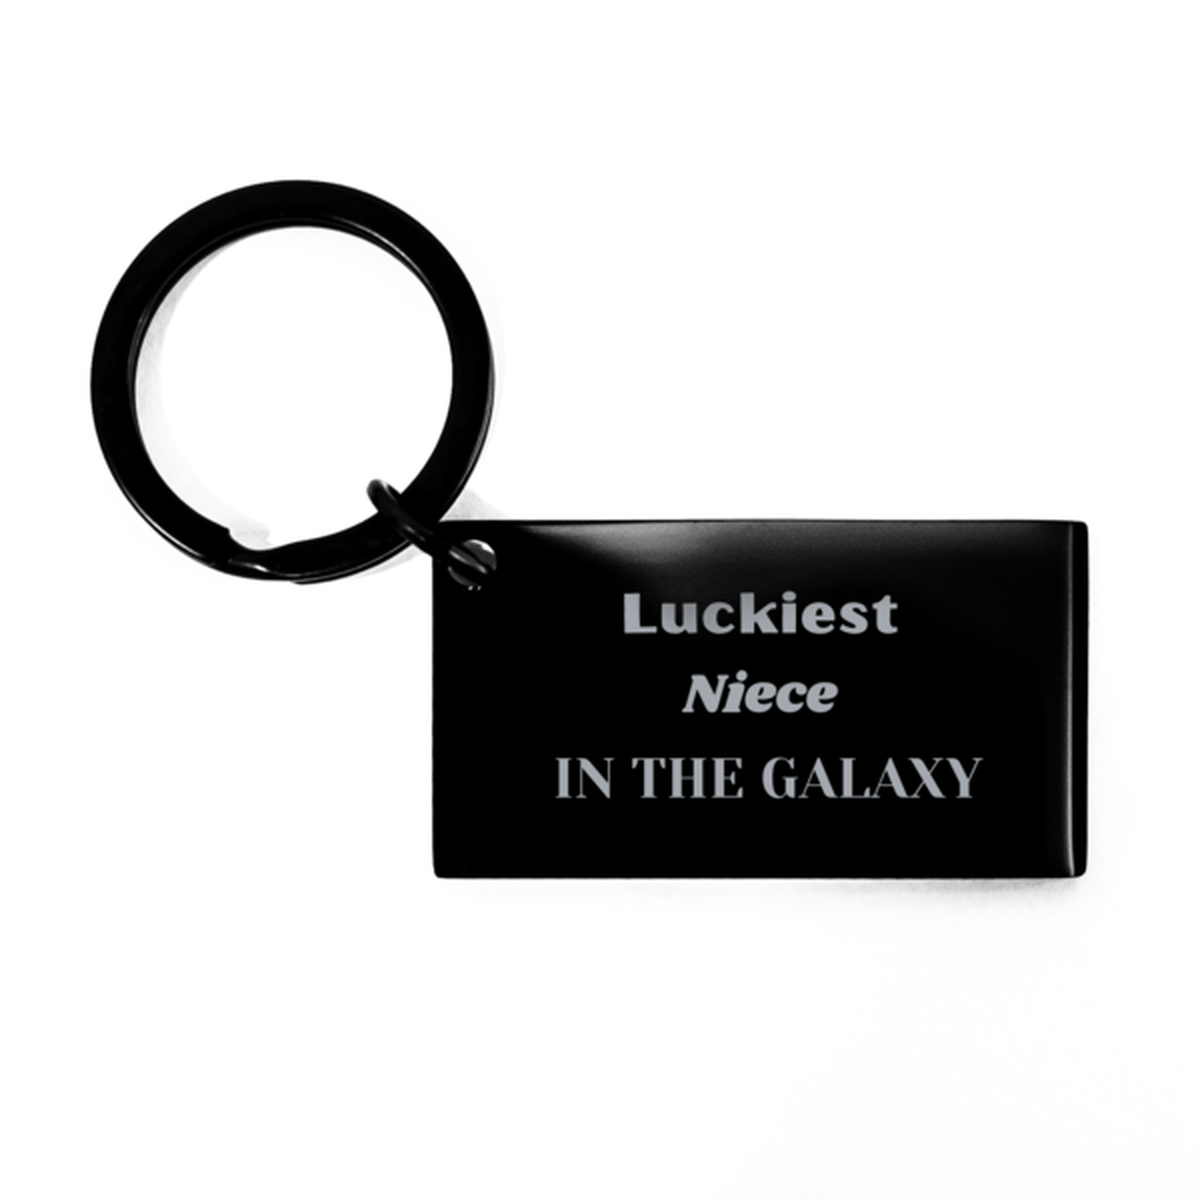 Luckiest Niece in the Galaxy, To My Niece Engraved Gifts, Christmas Niece Keychain Gifts, X-mas Birthday Unique Gifts For Niece Men Women